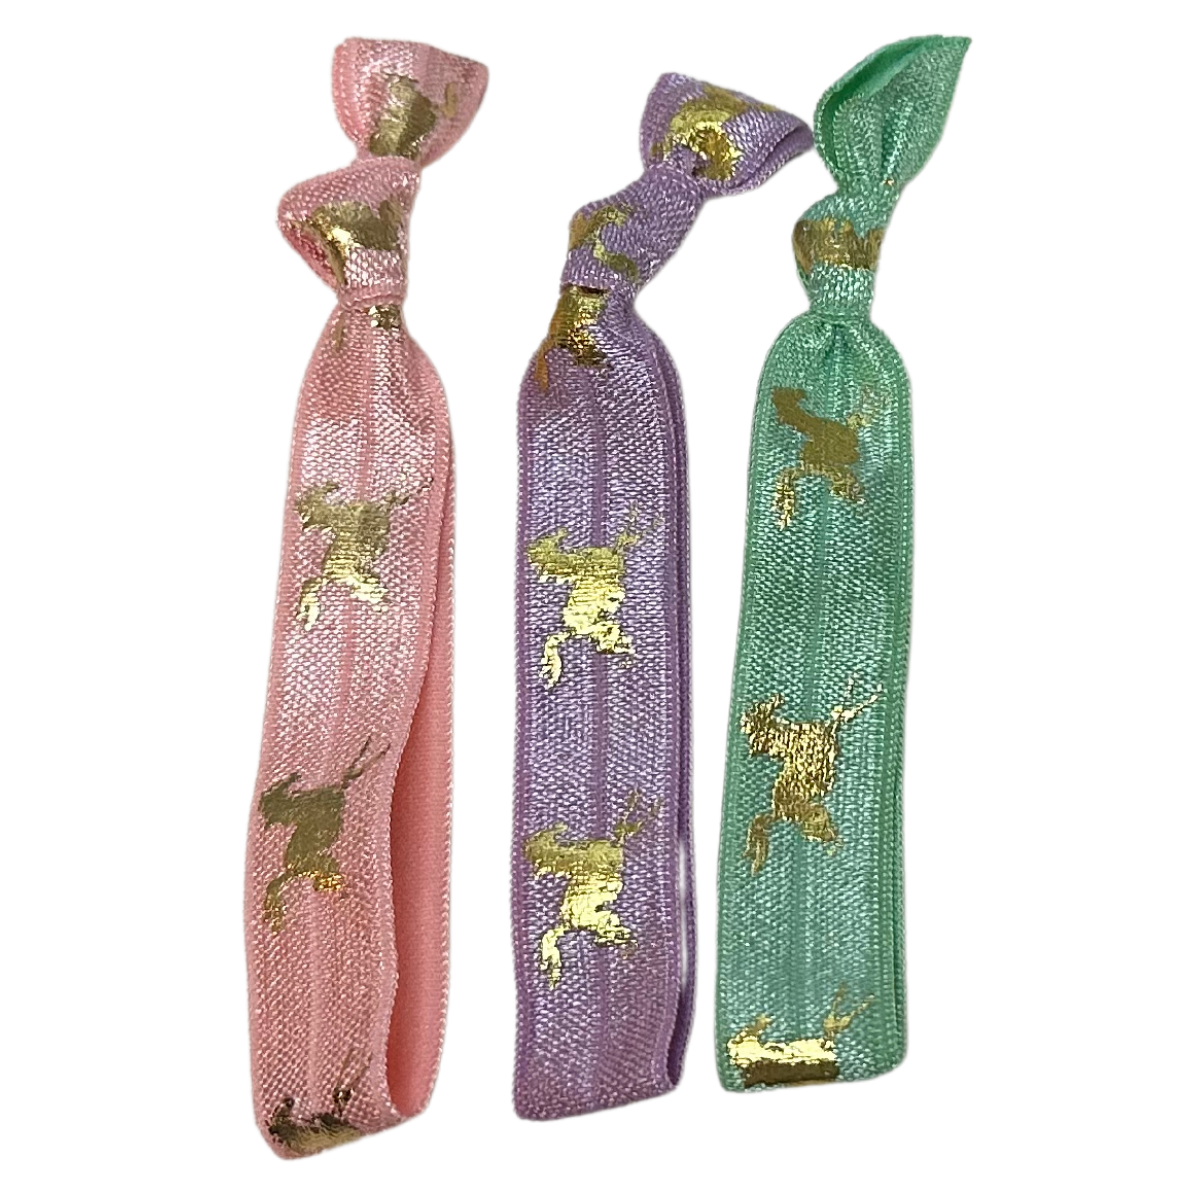 Gold Foil Horse Print Hair Ties in Spring Pastels - 3pc.